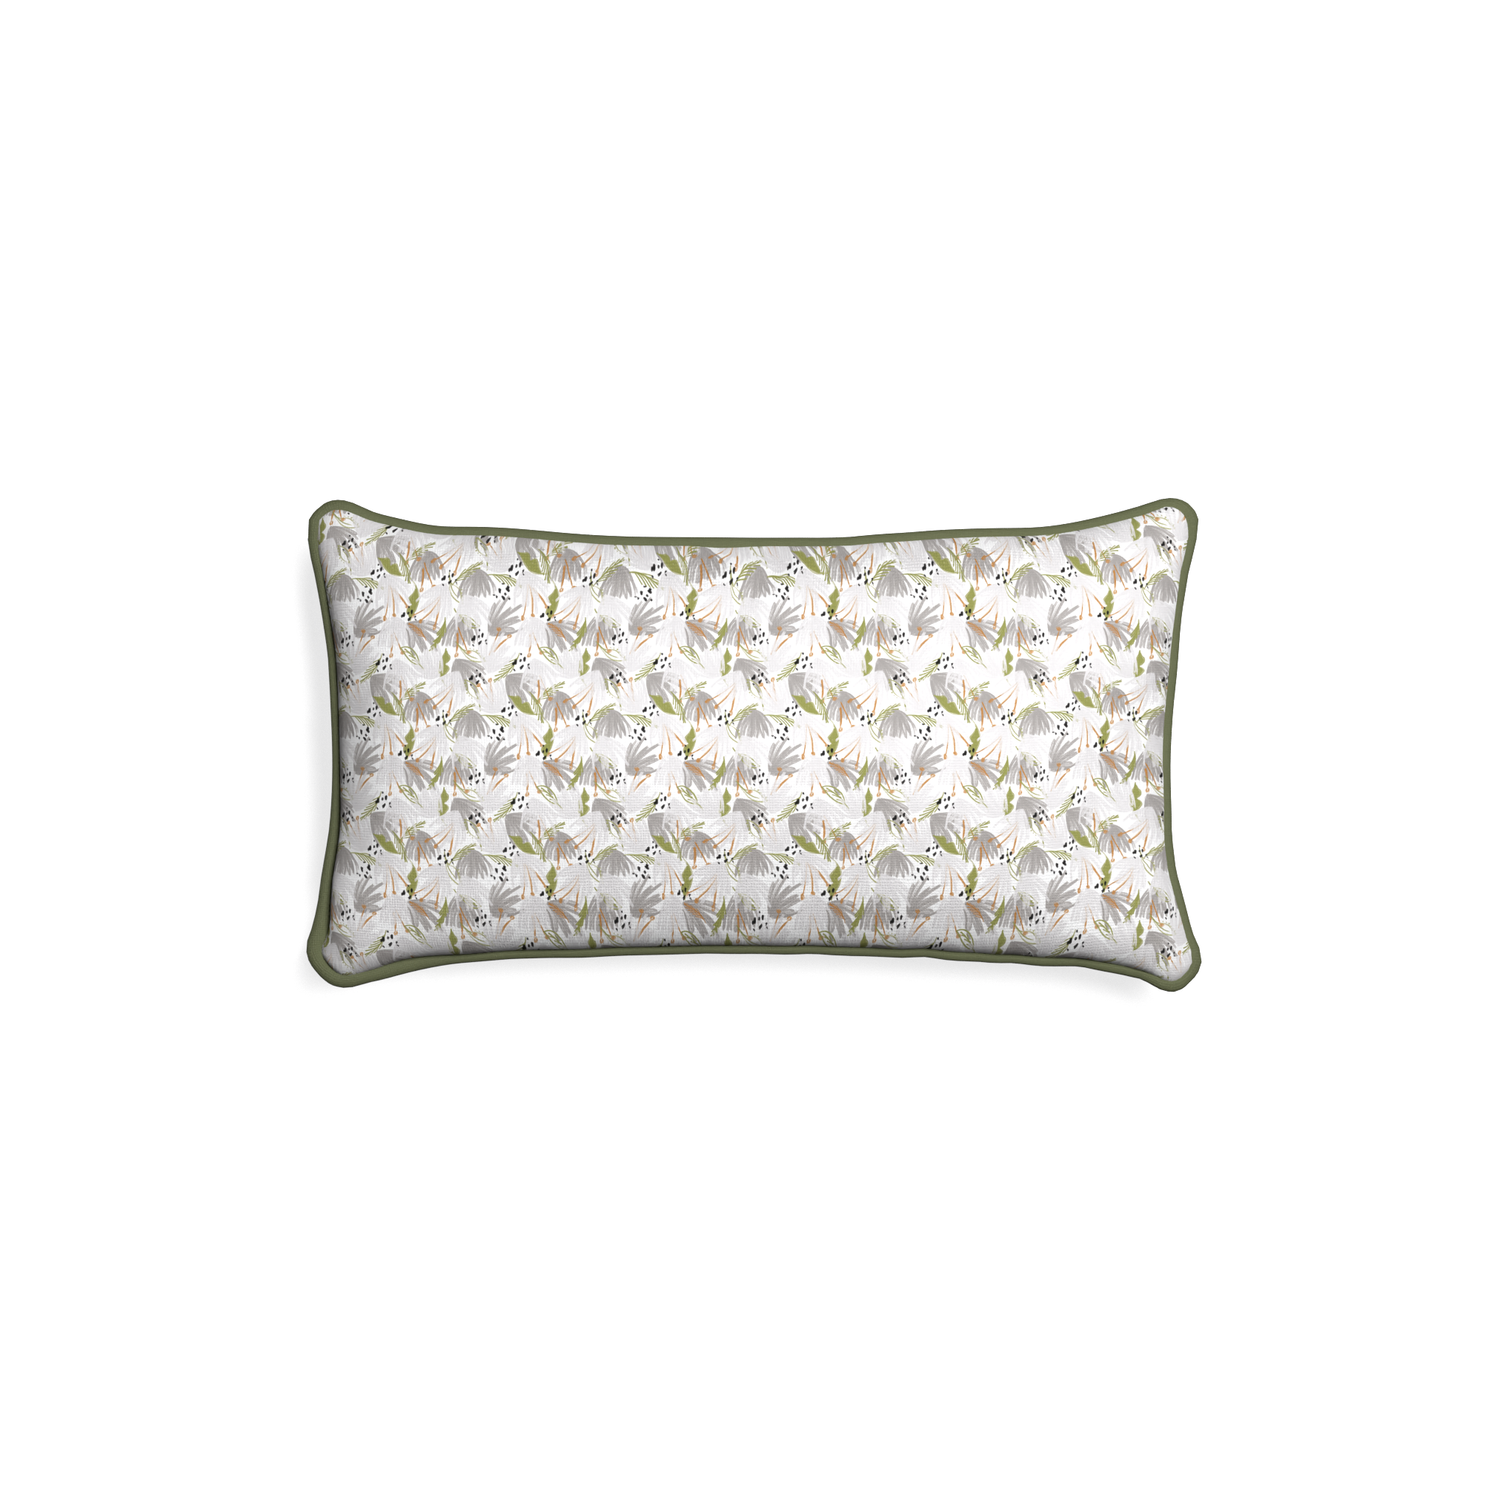 Petite-lumbar eden grey custom grey floralpillow with f piping on white background